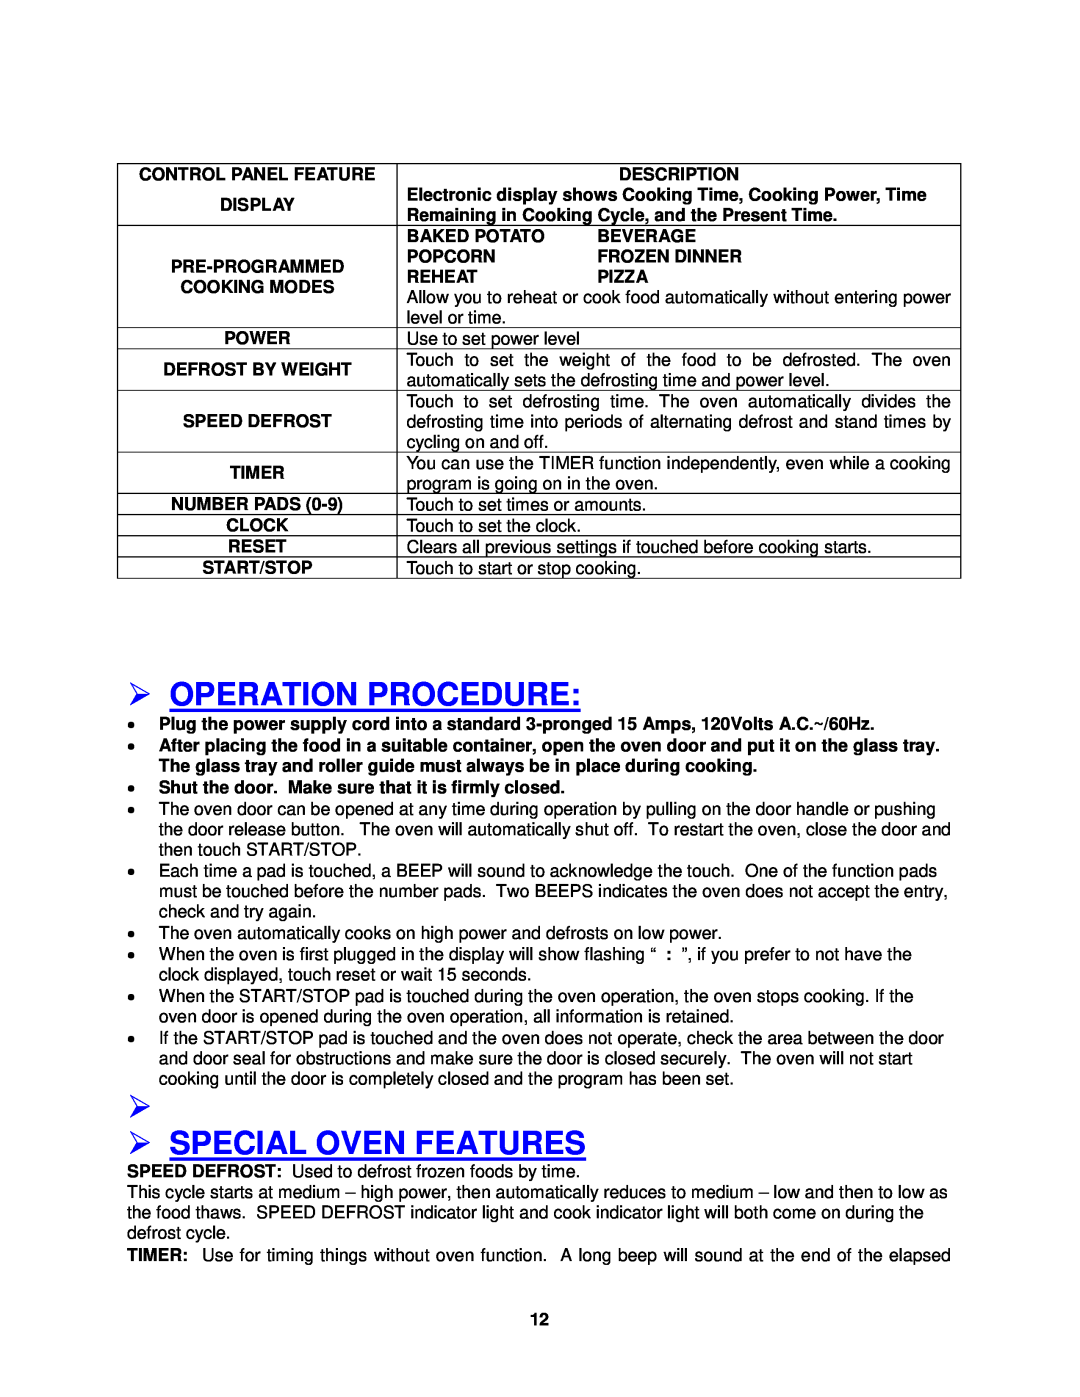 Avanti MO9005BST instruction manual Operation Procedure, Special Oven Features 